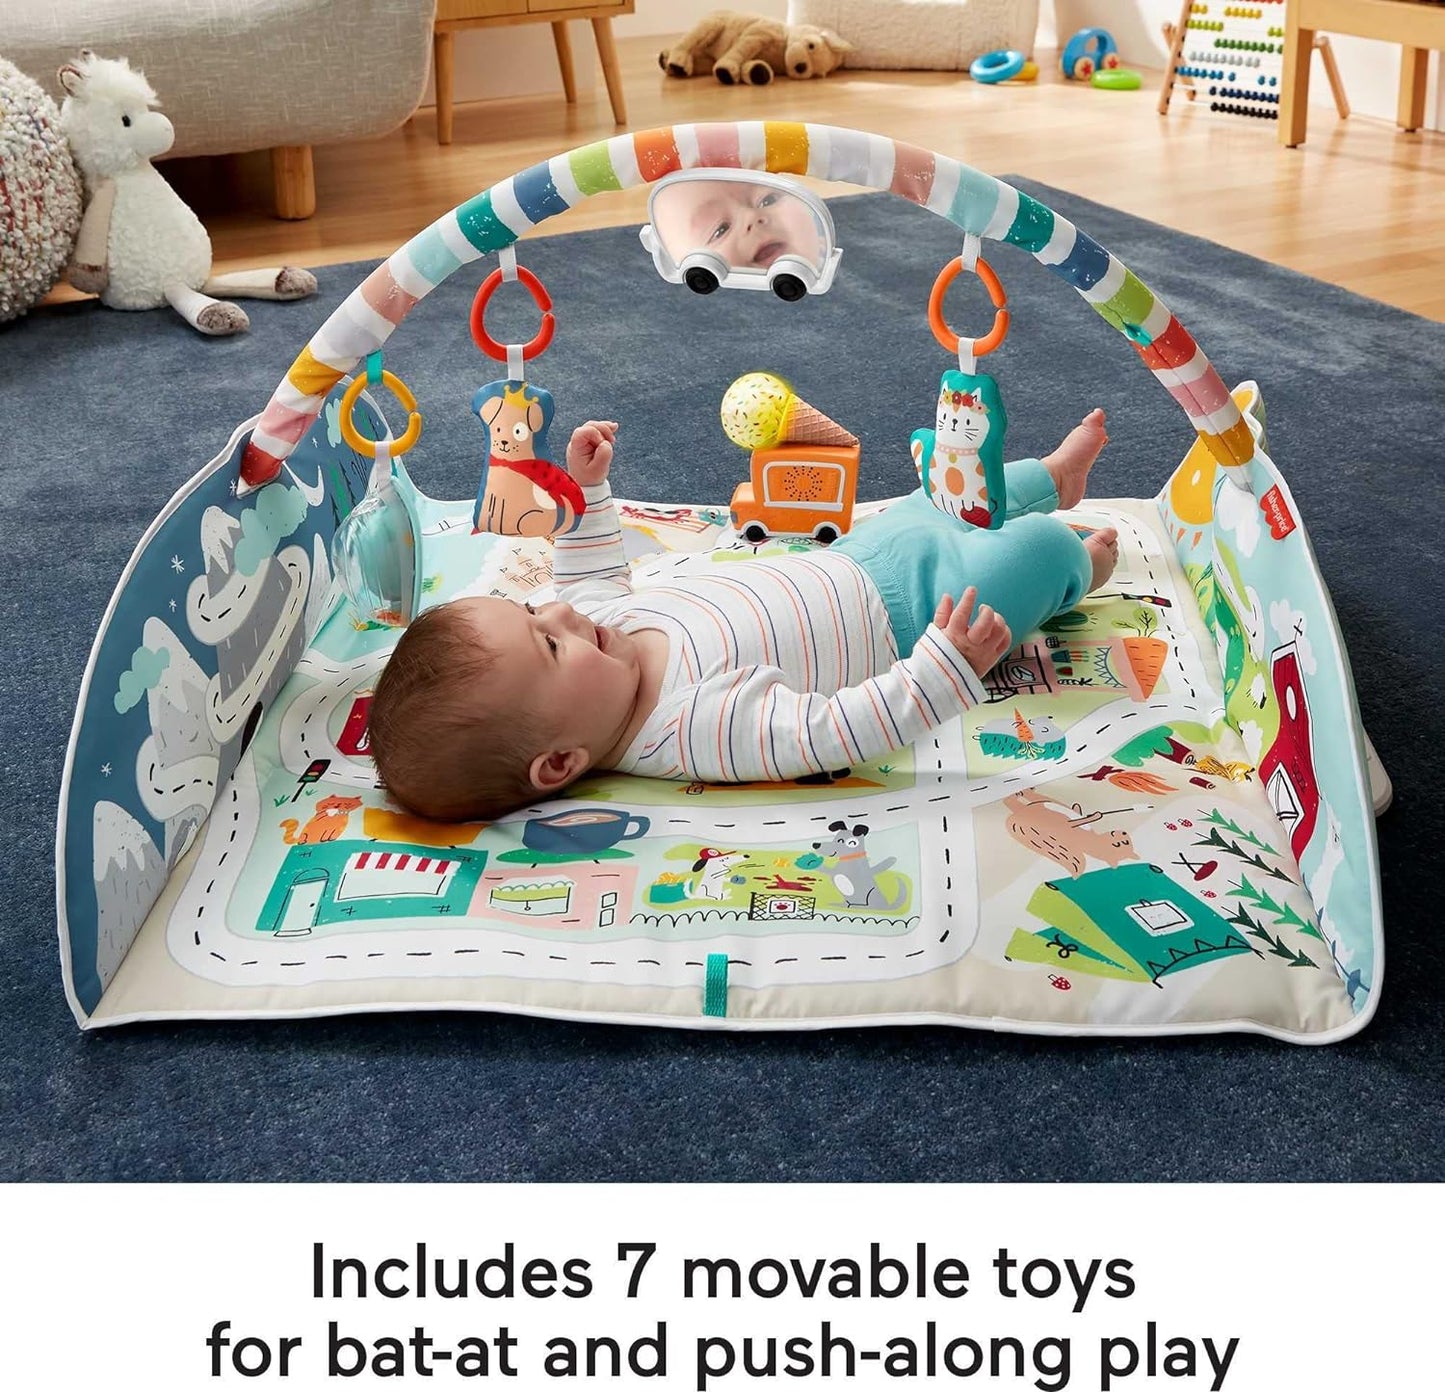 Fisher-Price Baby Large Activity City Gym to Jumbo Playmat with Music Lights Vehicles & Baby Toys for Infant to Toddler Play